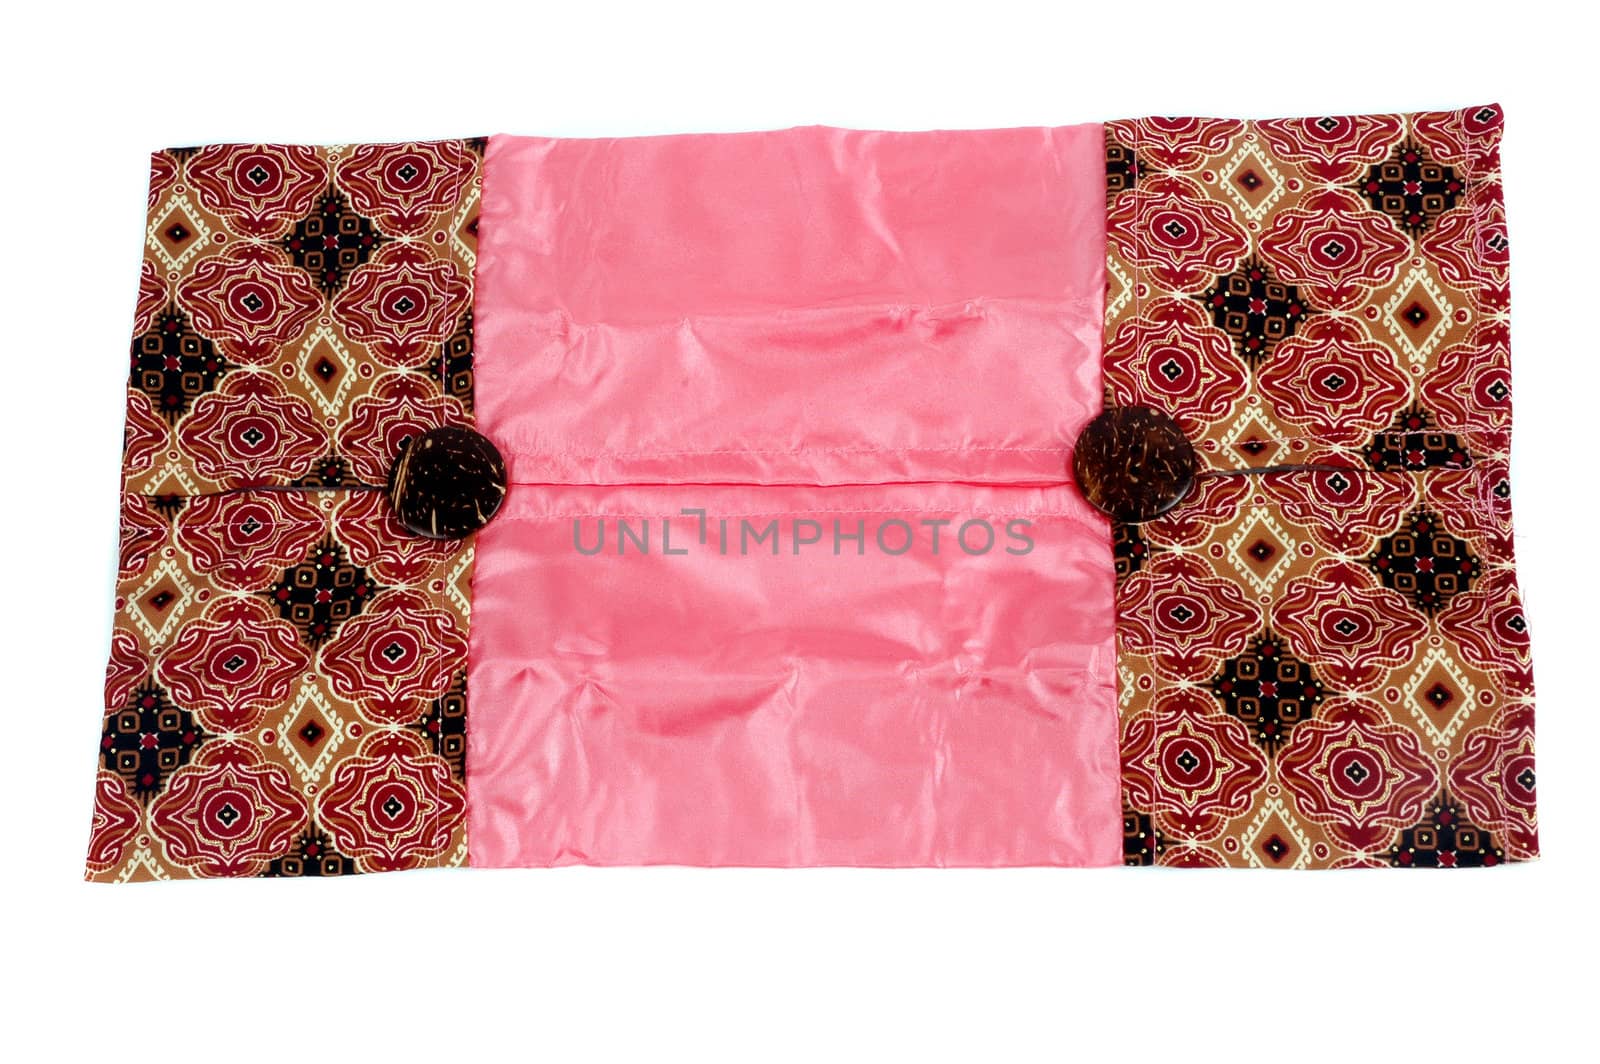 a glove box of tissues patterned batik cloth by antonihalim